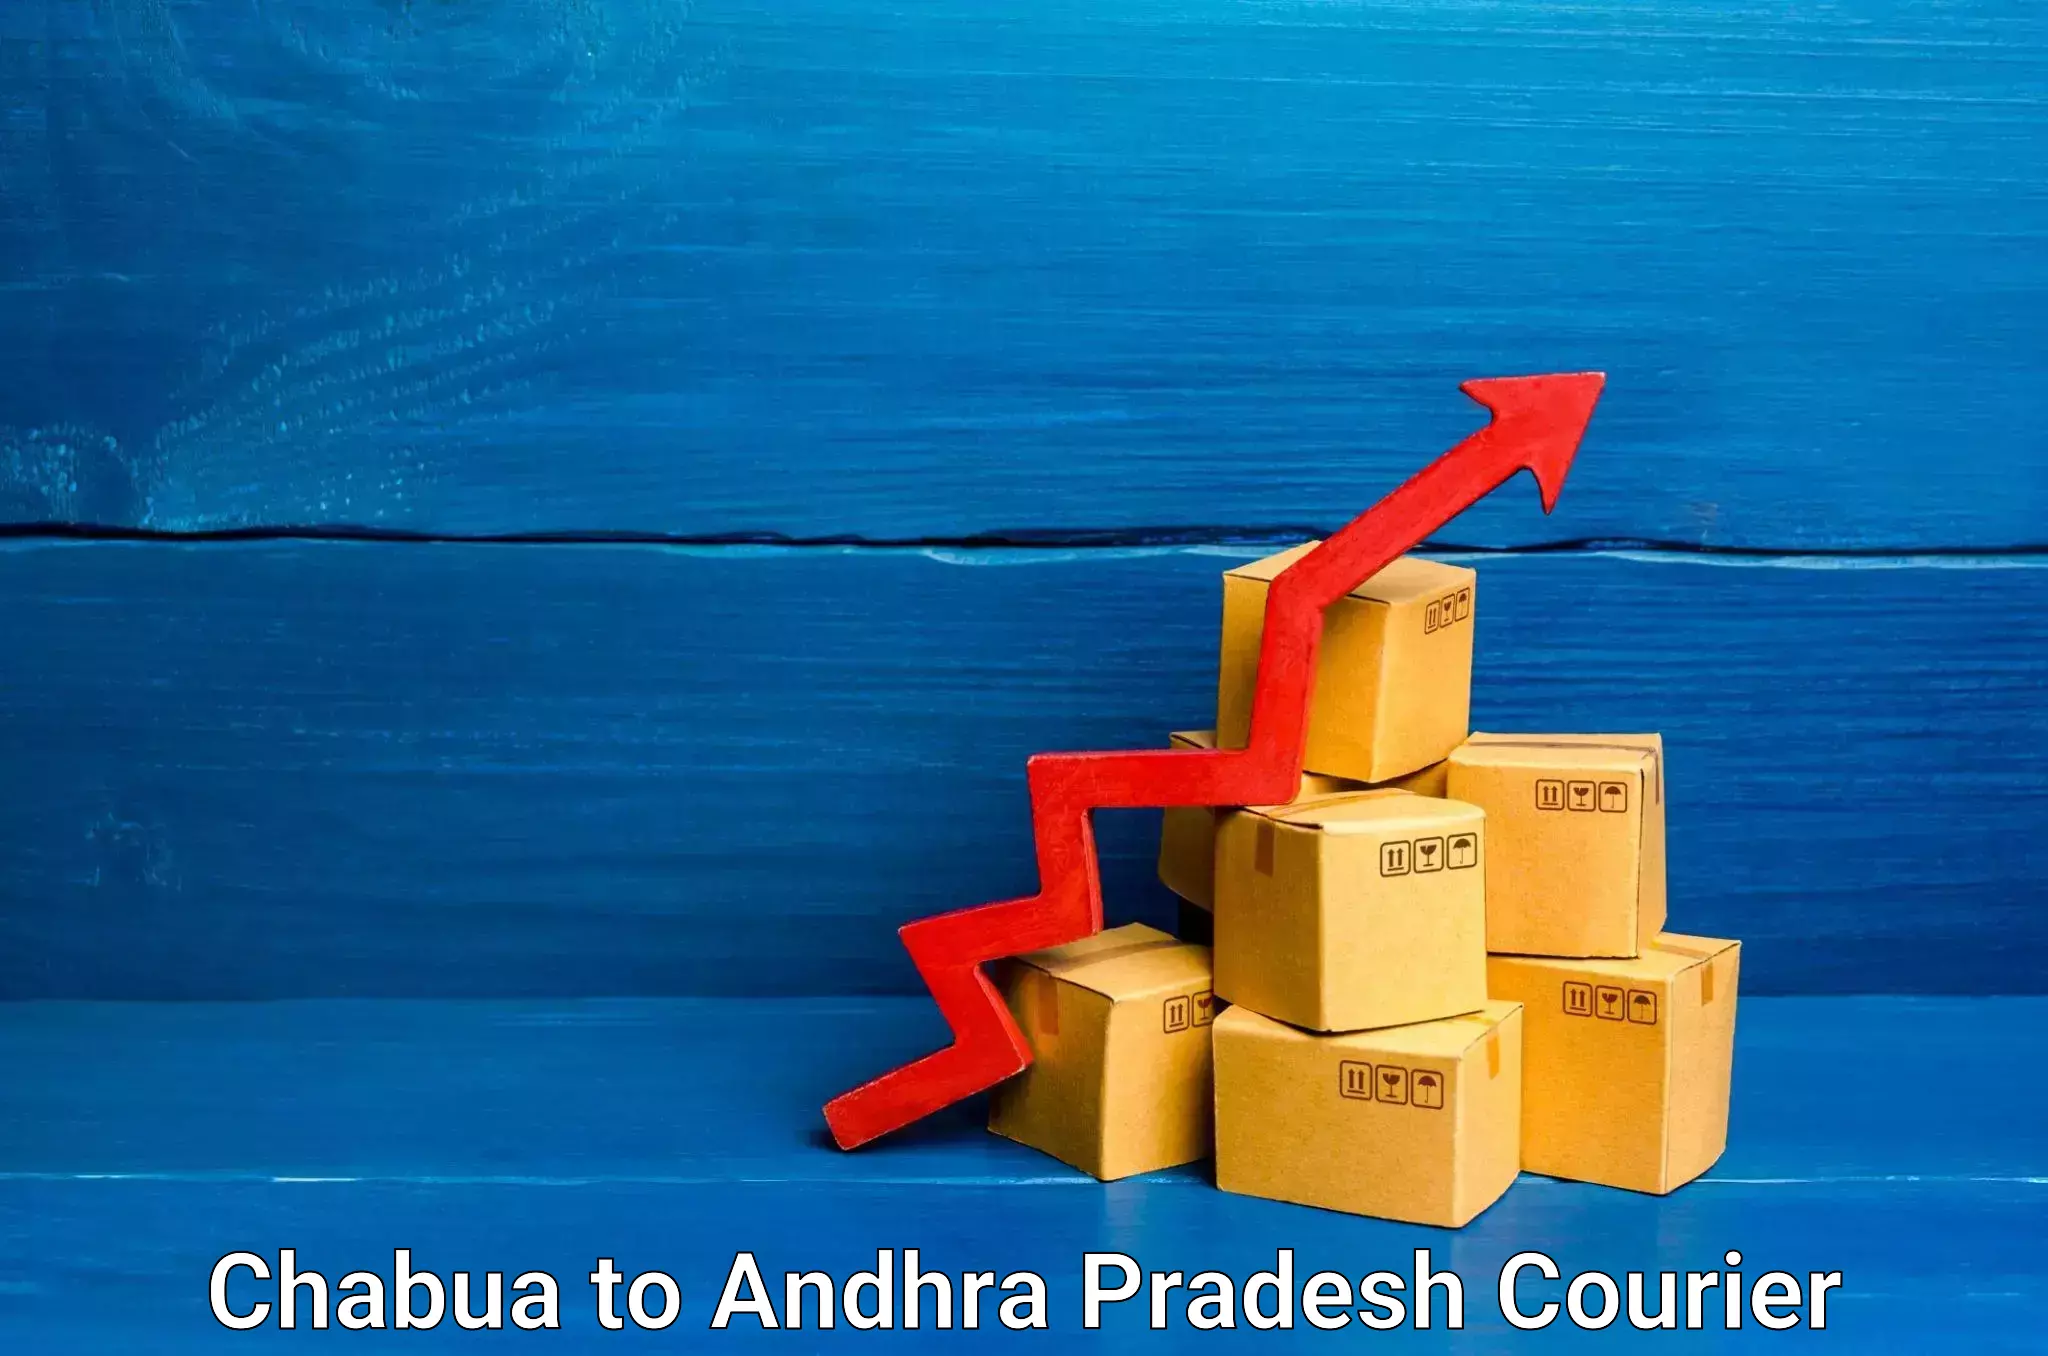 State-of-the-art courier technology Chabua to Gudur